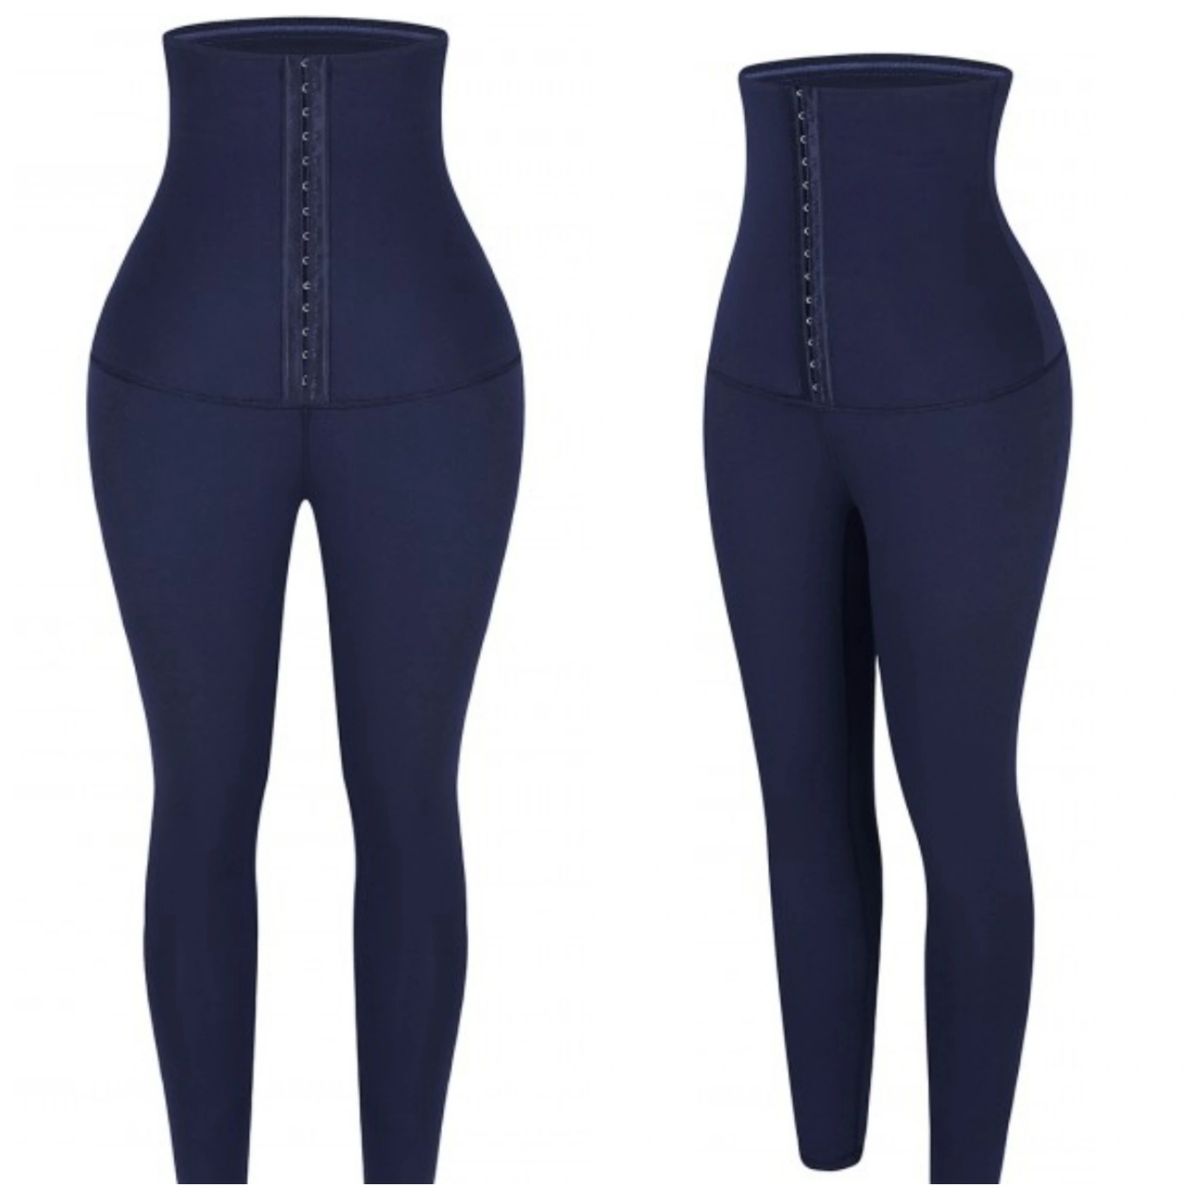 Juicy Waist Trainer Leggings by Summer Lucille (Size: 3X)